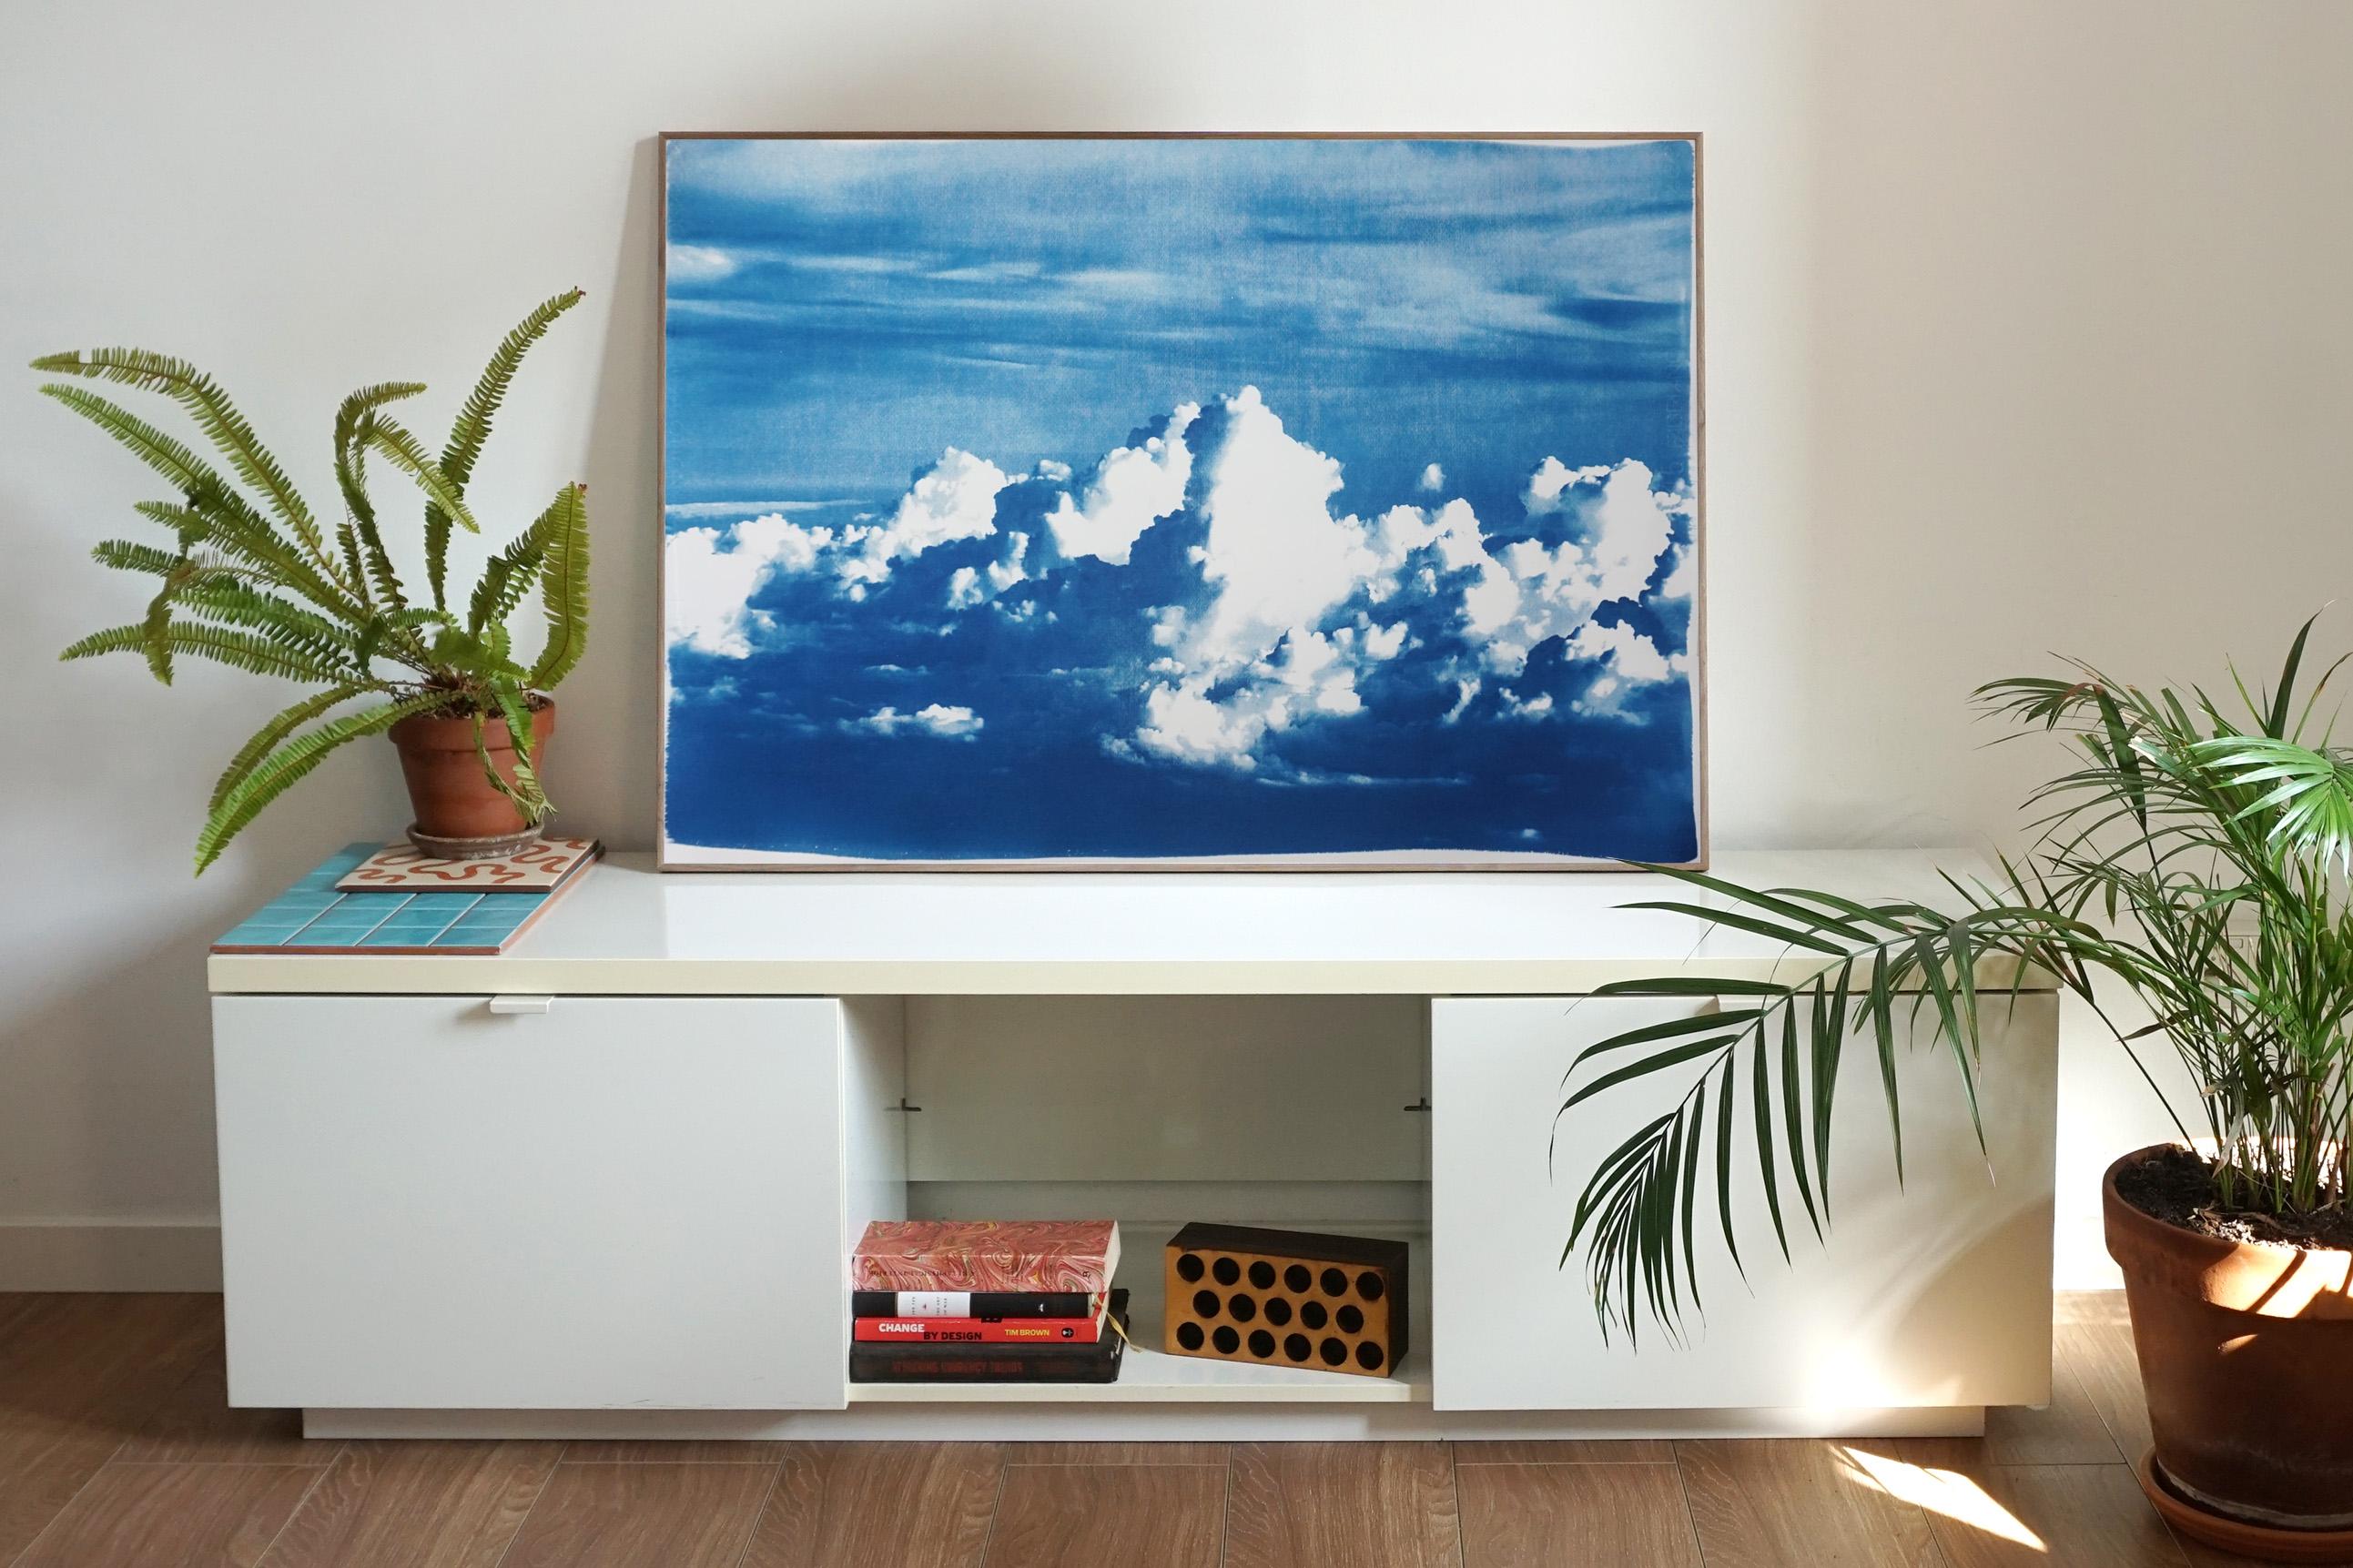 Blustery Clouds After a Storm, Sky Blue Handprinted Cyanotype, Meaningful Scene – Art von Kind of Cyan